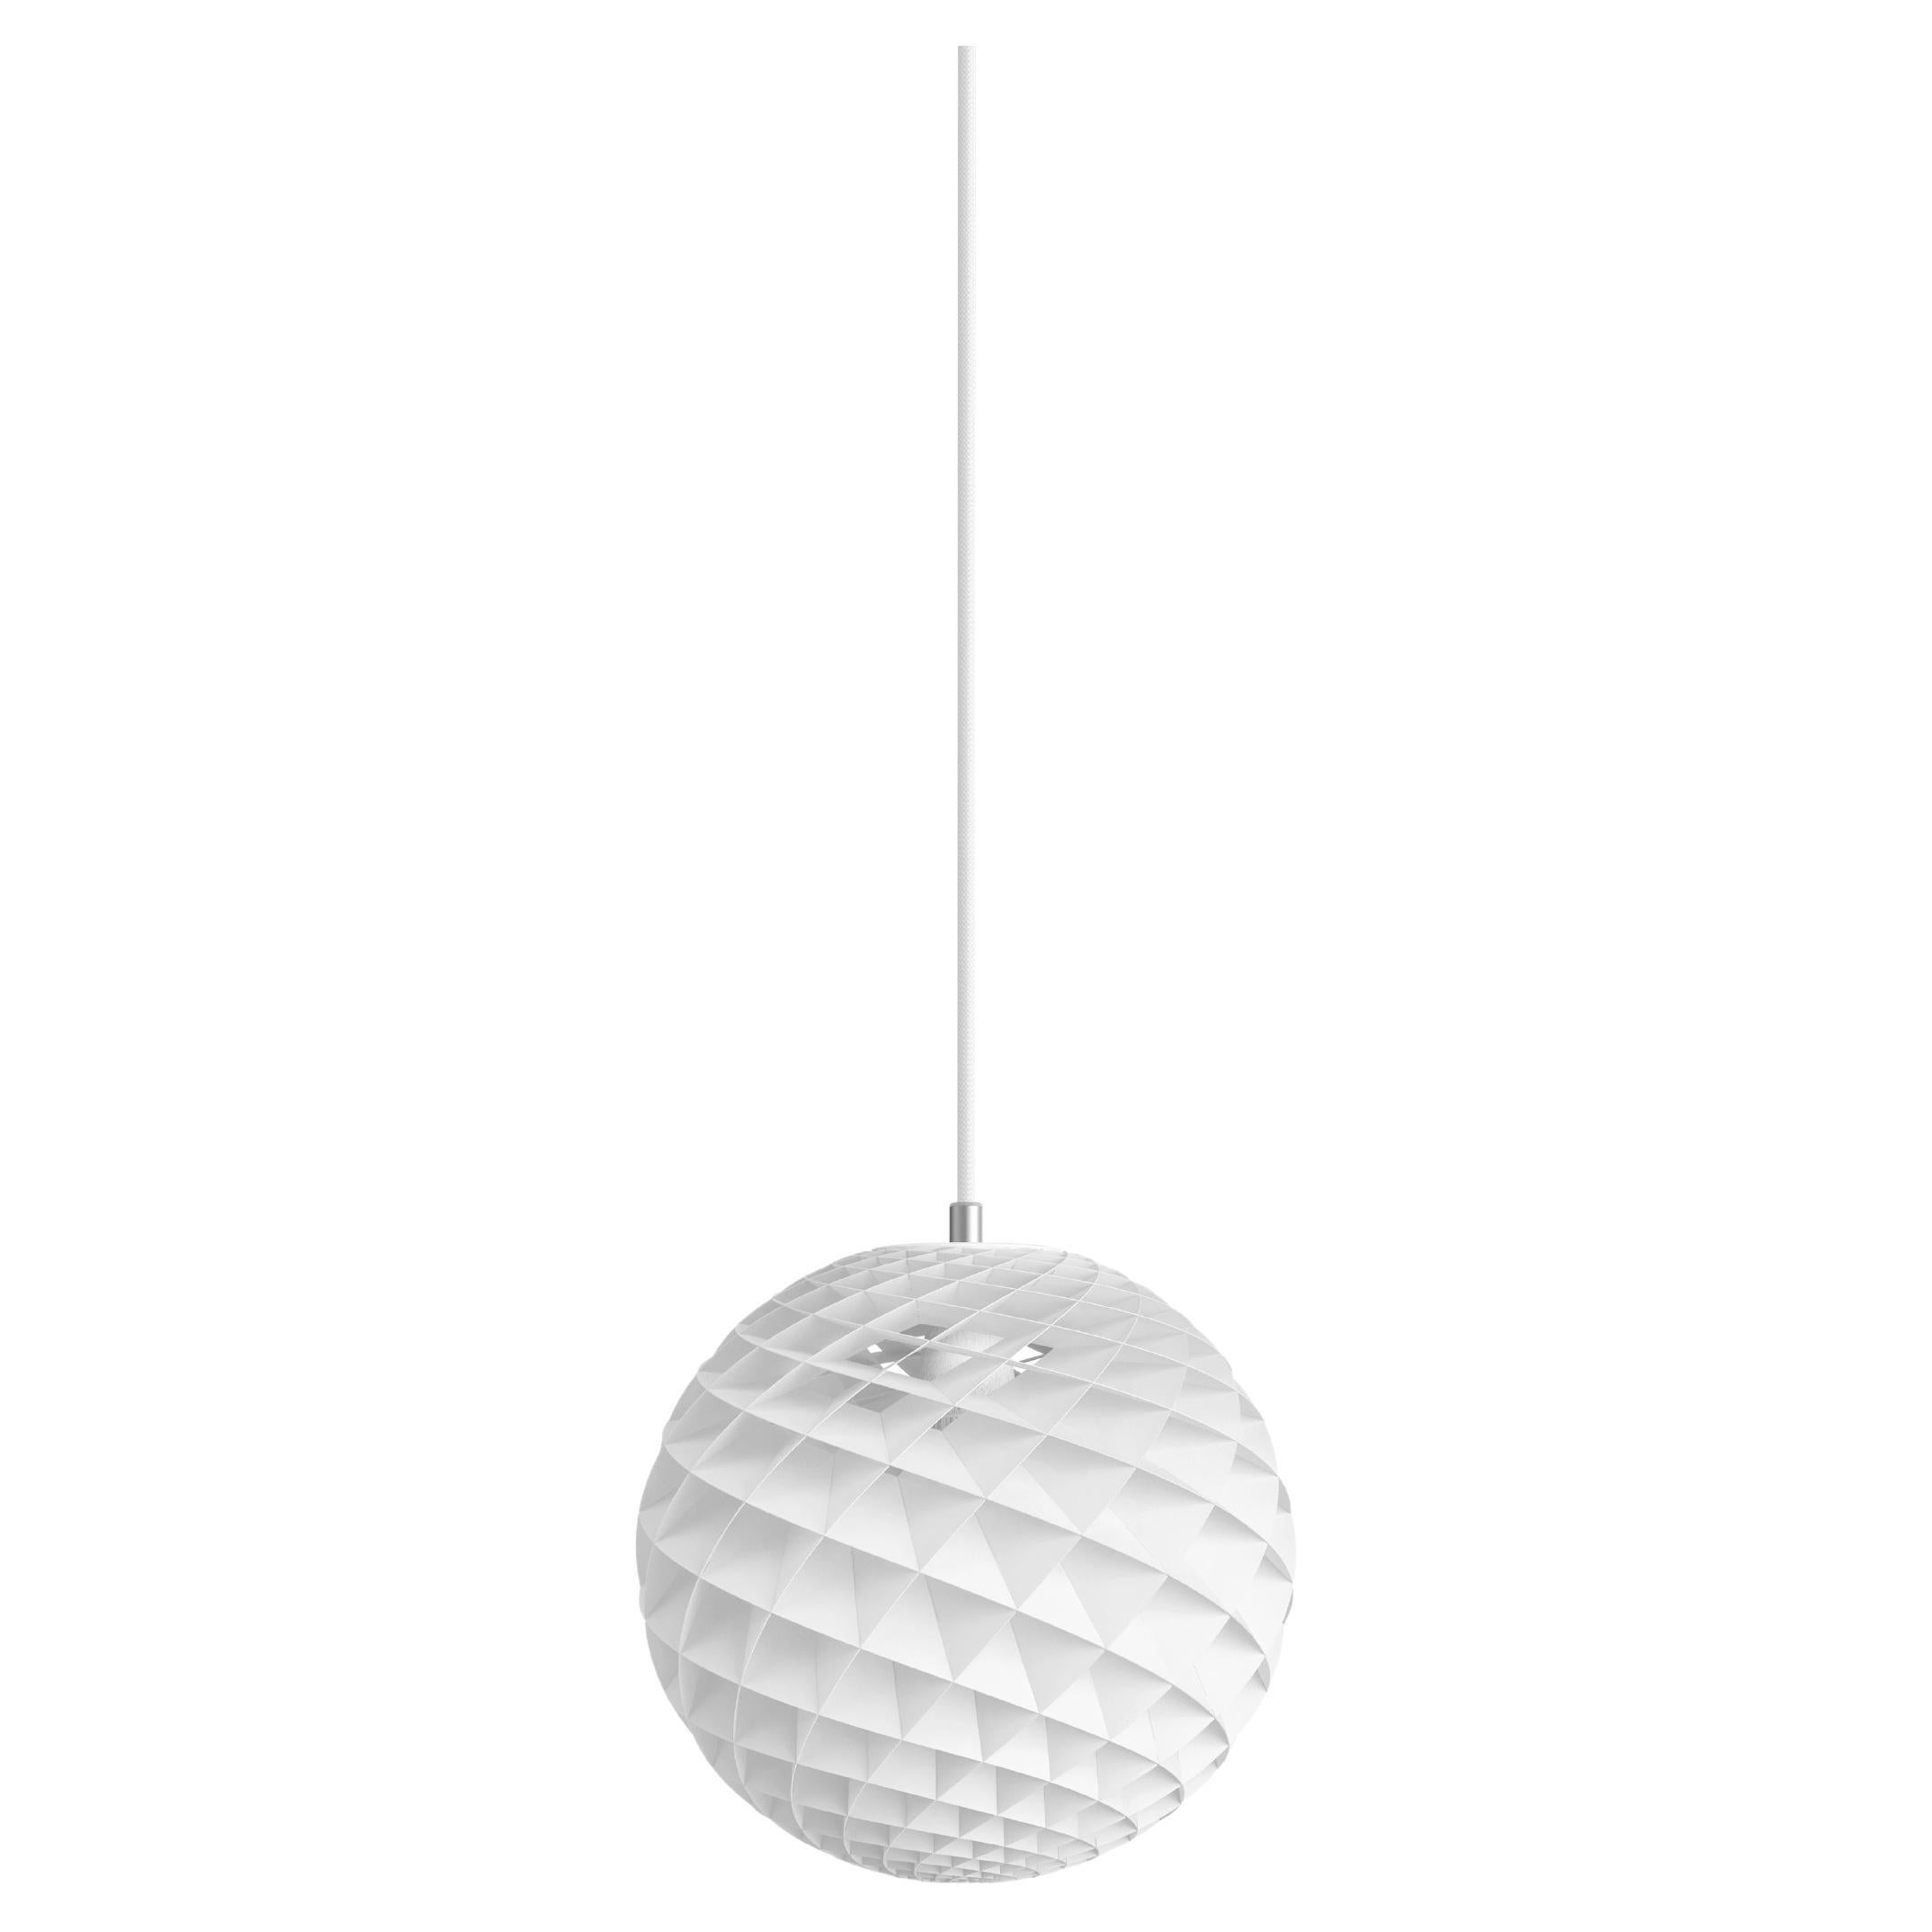 About This Product
The Patera pendant was designed by Øivind Slaatto, who based it on the mathematics of the Fibonacci sequence. The poetic 360-degree glow of the Patera is derived from its many small diamond-shaped cells, which are assembled by